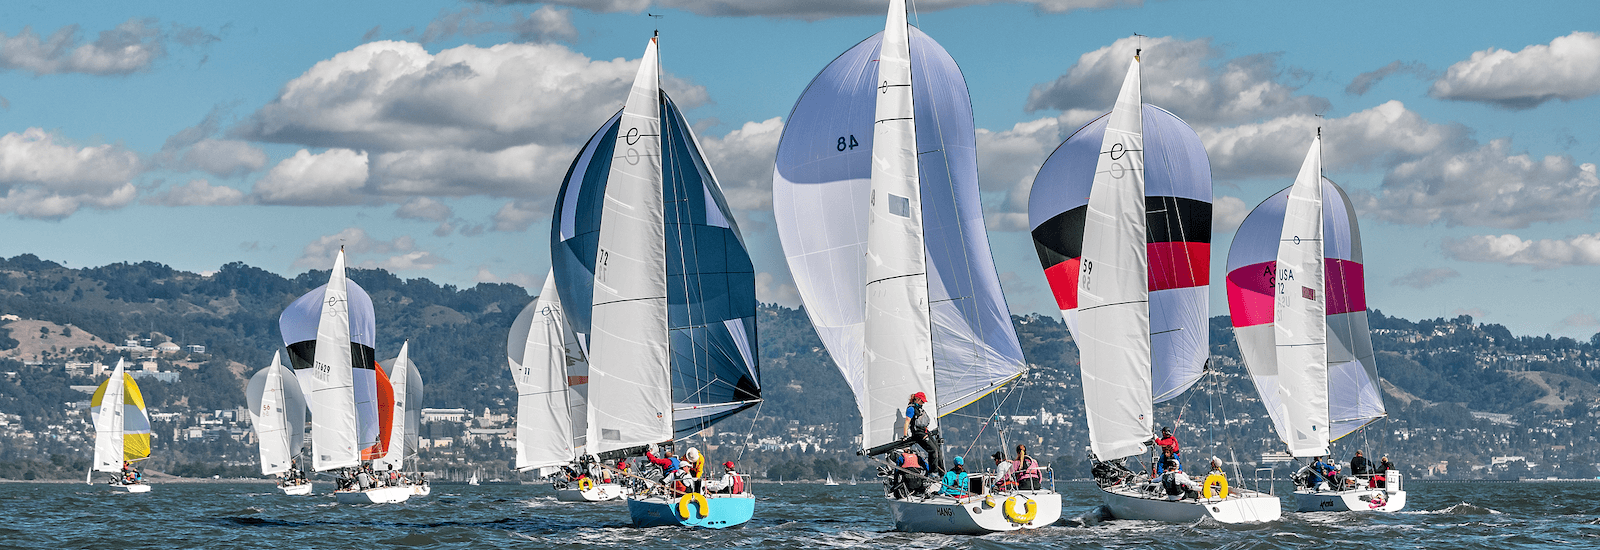 racing events at Richmond Yacht Club in California 